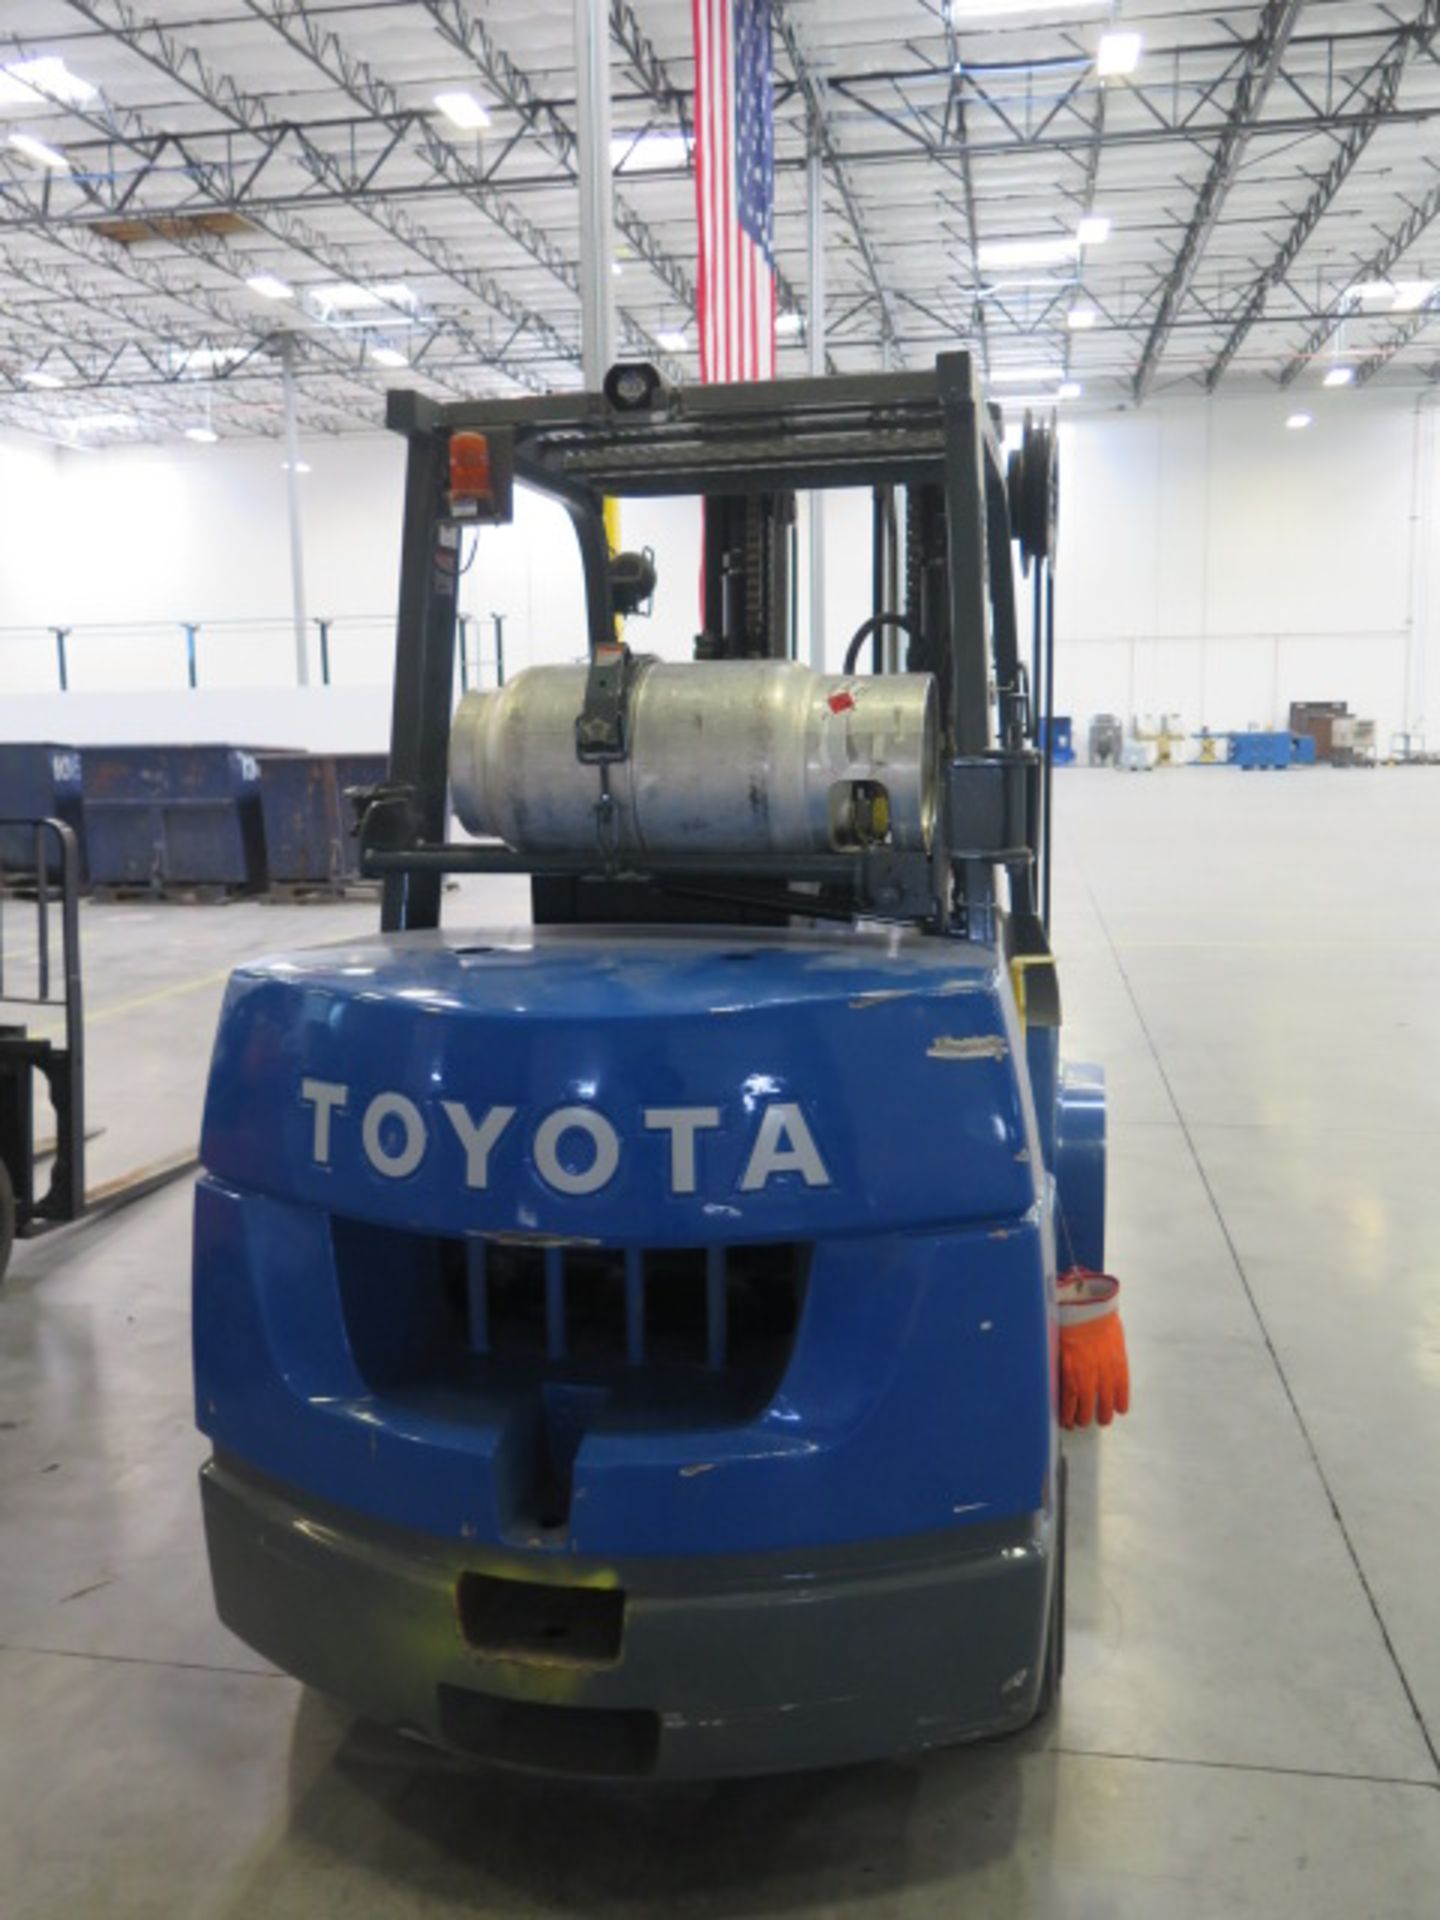 Toyota 7FGCU45 10,000 Lb Cap LPG Forklift s/n 70247 w/ 3-Stage Mast, 187” Lift height, Side Shift, - Image 2 of 13